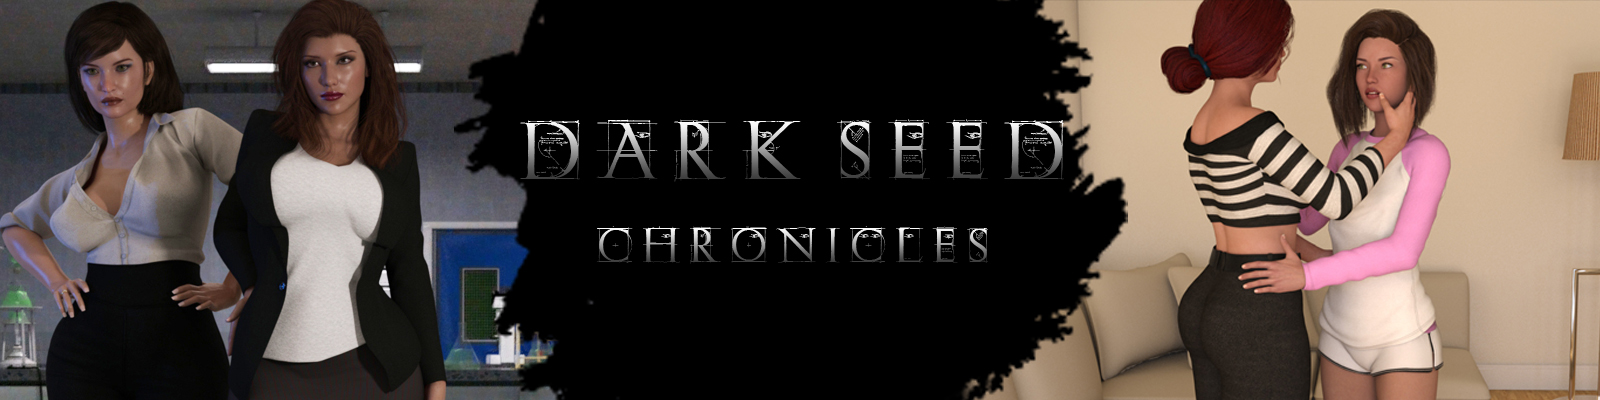 Dark Seed Chronicles poster